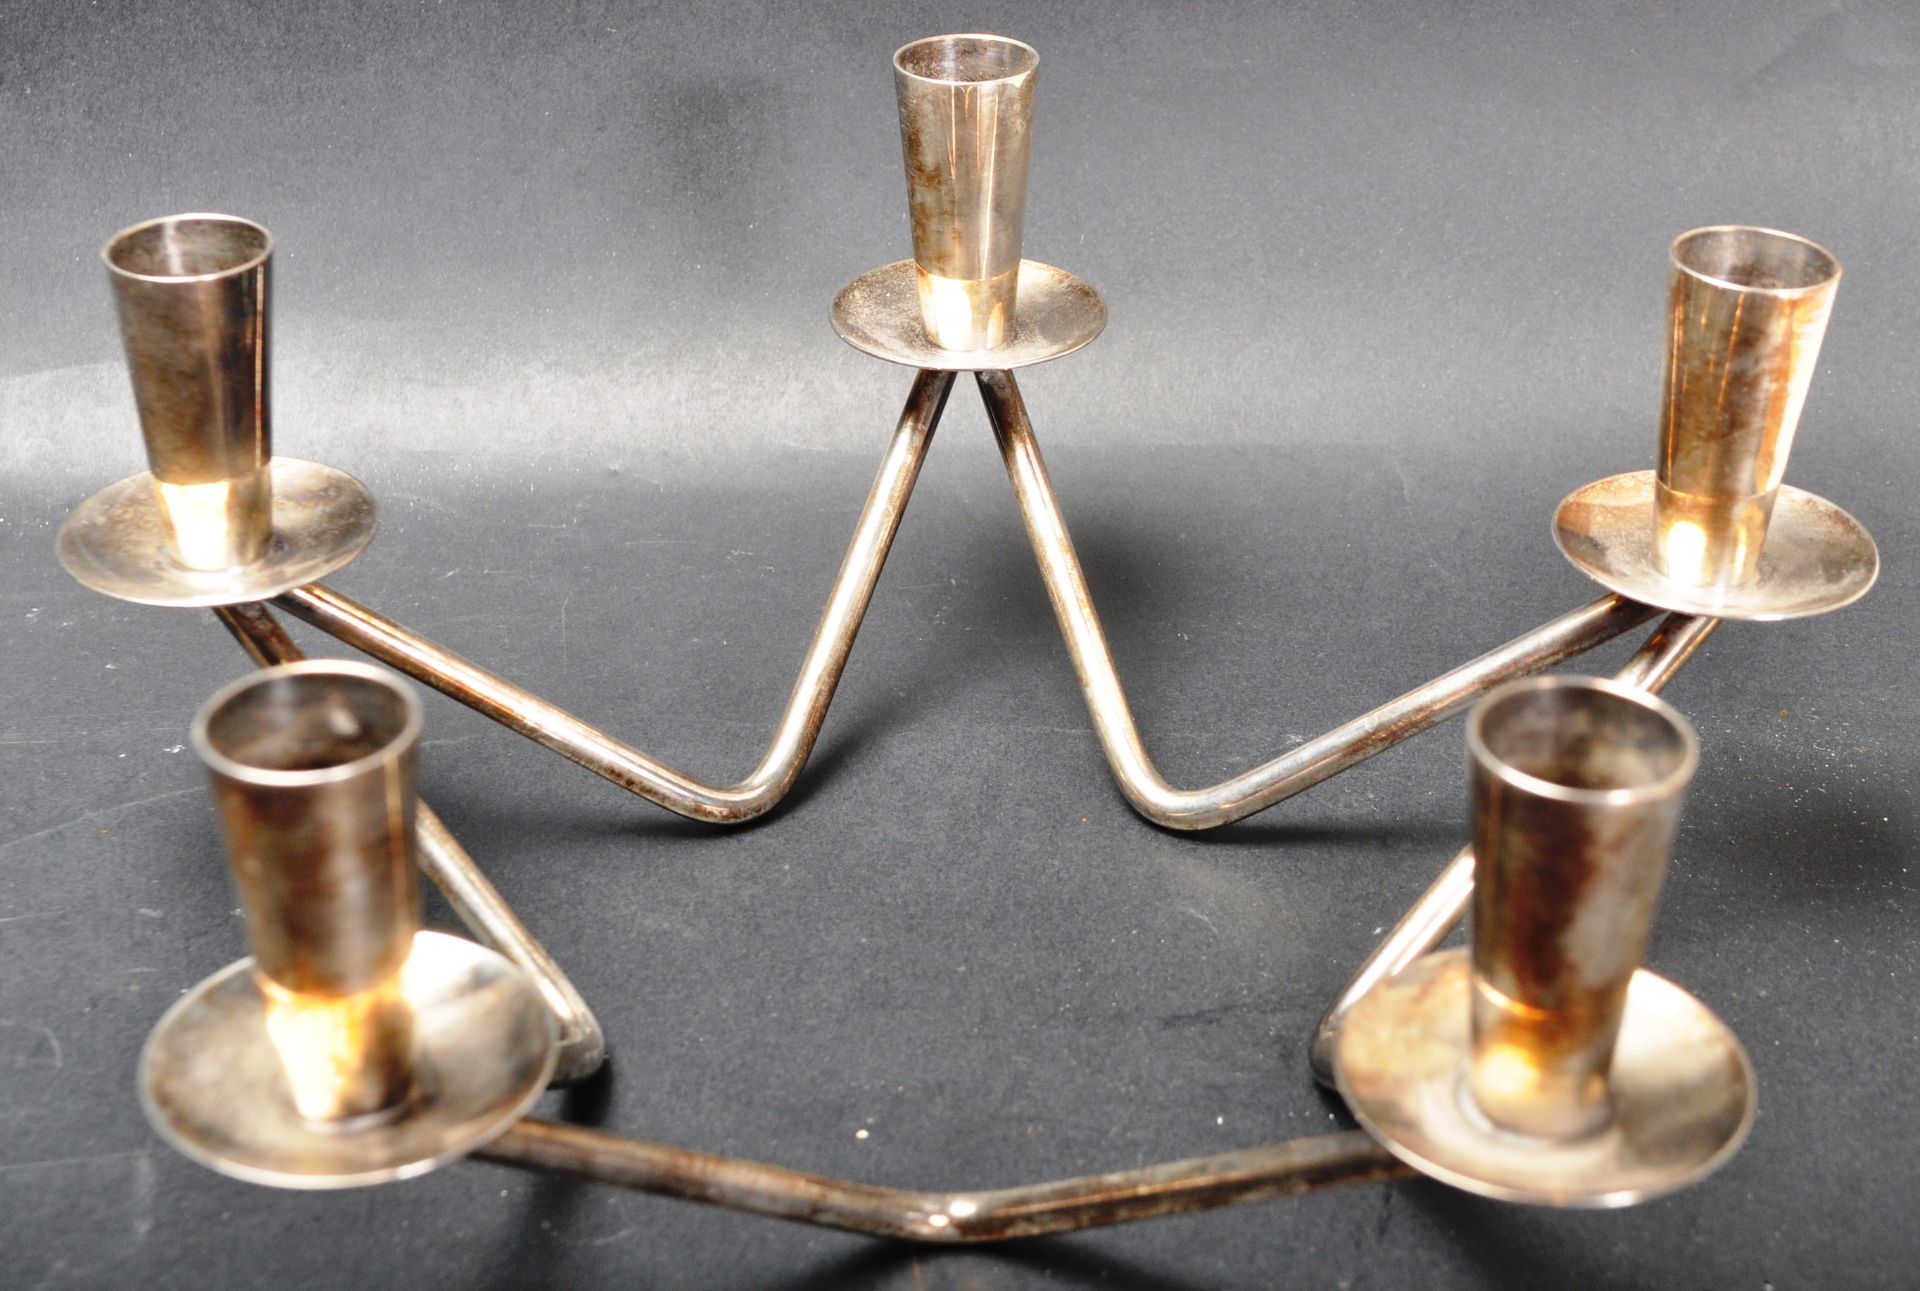 VINTAGE RETRO SILVER PLATED STAR SHAPED CANDLE HOLDER BY BREG DENMARK - Image 3 of 7